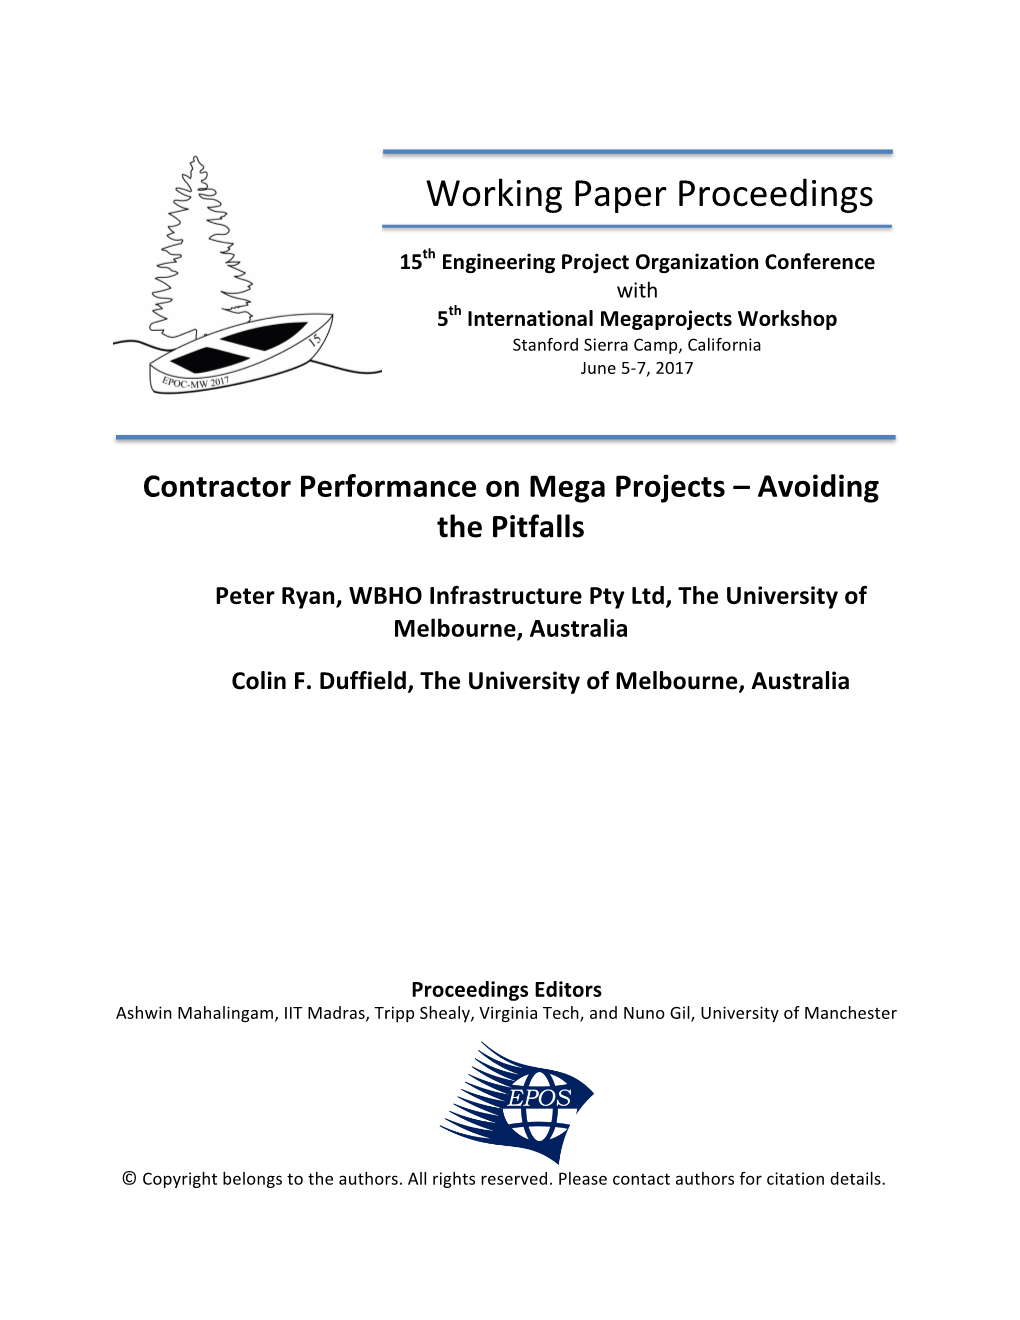 Contractor Performance on Mega Projects – Avoiding the Pitfalls